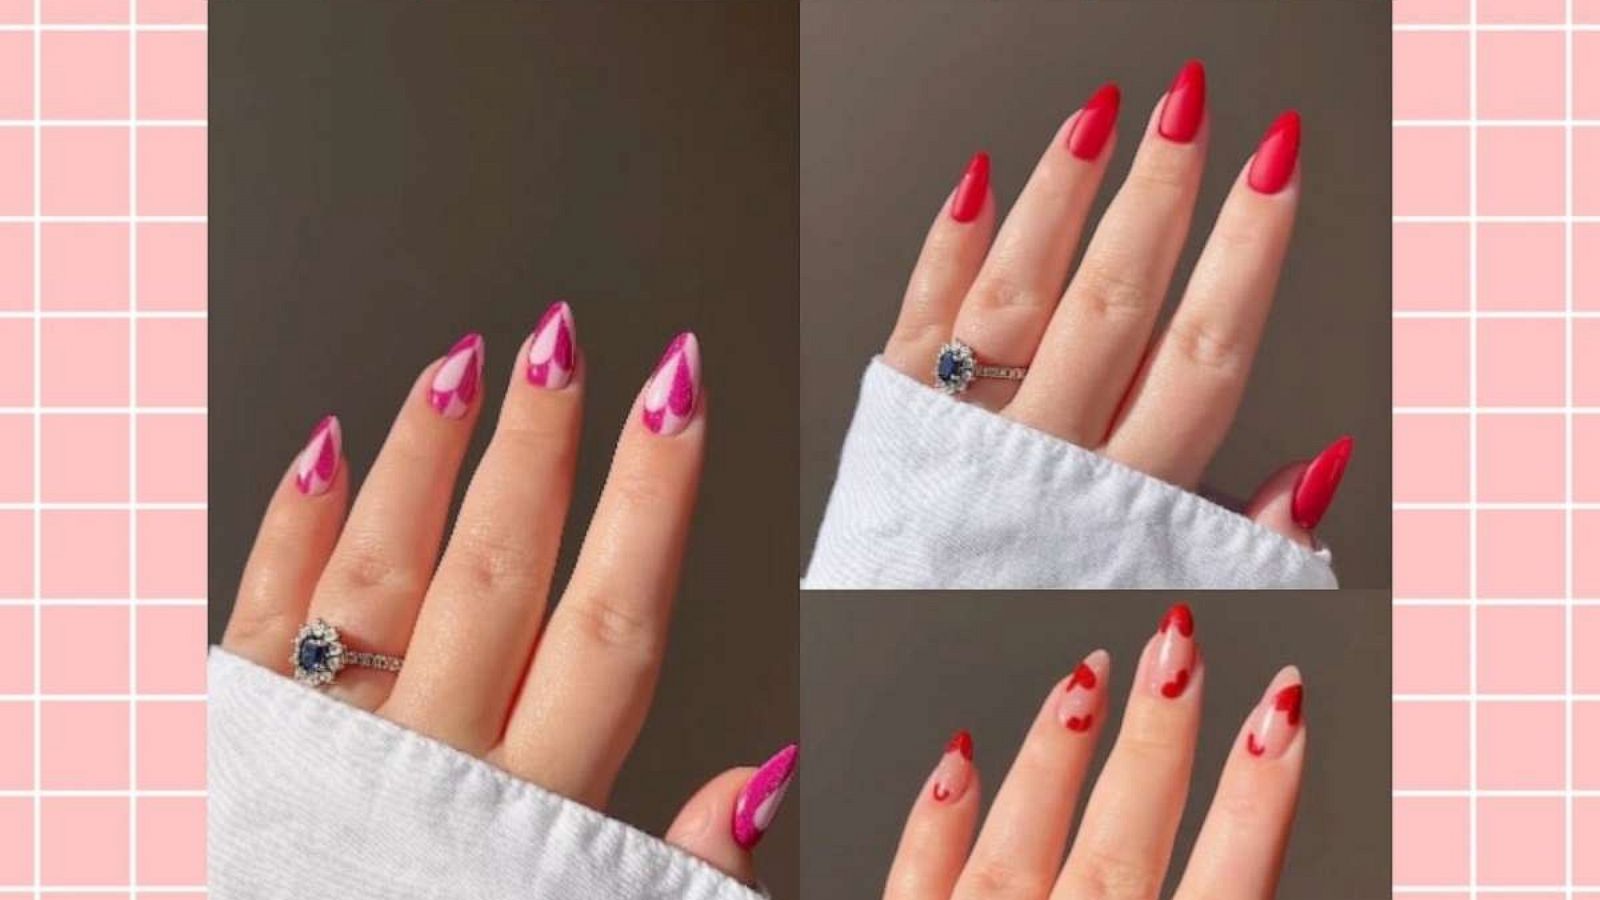 Fall in love with these nail art ideas that are perfect for Valentine's Day.